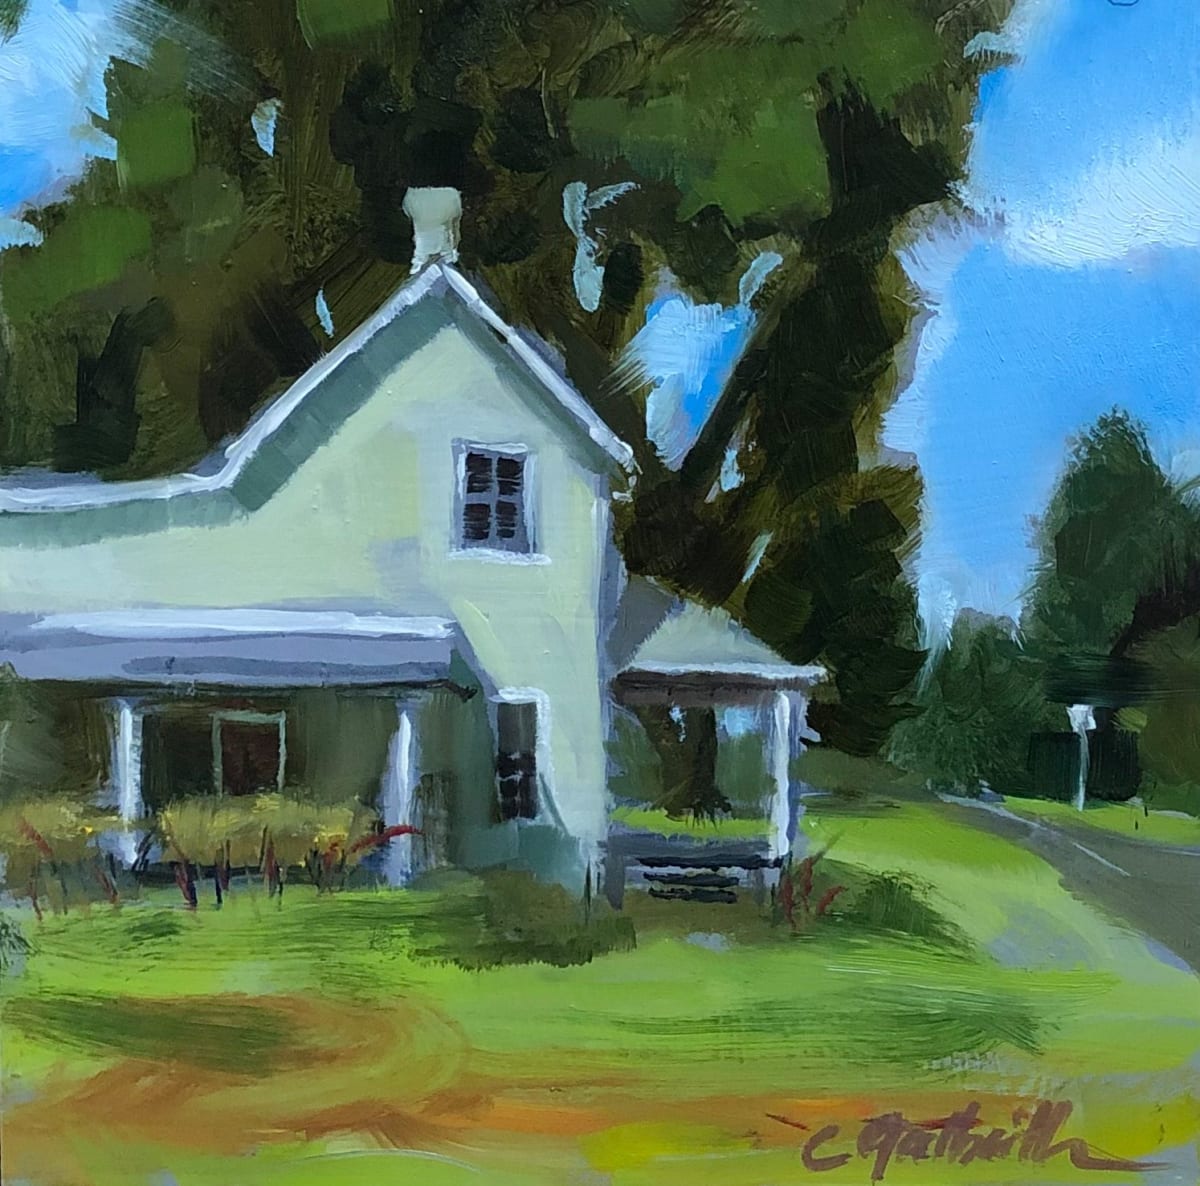 Landers Place by Cary Galbraith  Image: I have a thing about houses. This is a classic old farmhouse I often drive by.  It was vacant while being renovated. While I was painting, the grand-daughters of the previous owners drove up to check out what the new owners were doing and to get a peek at my painting. 